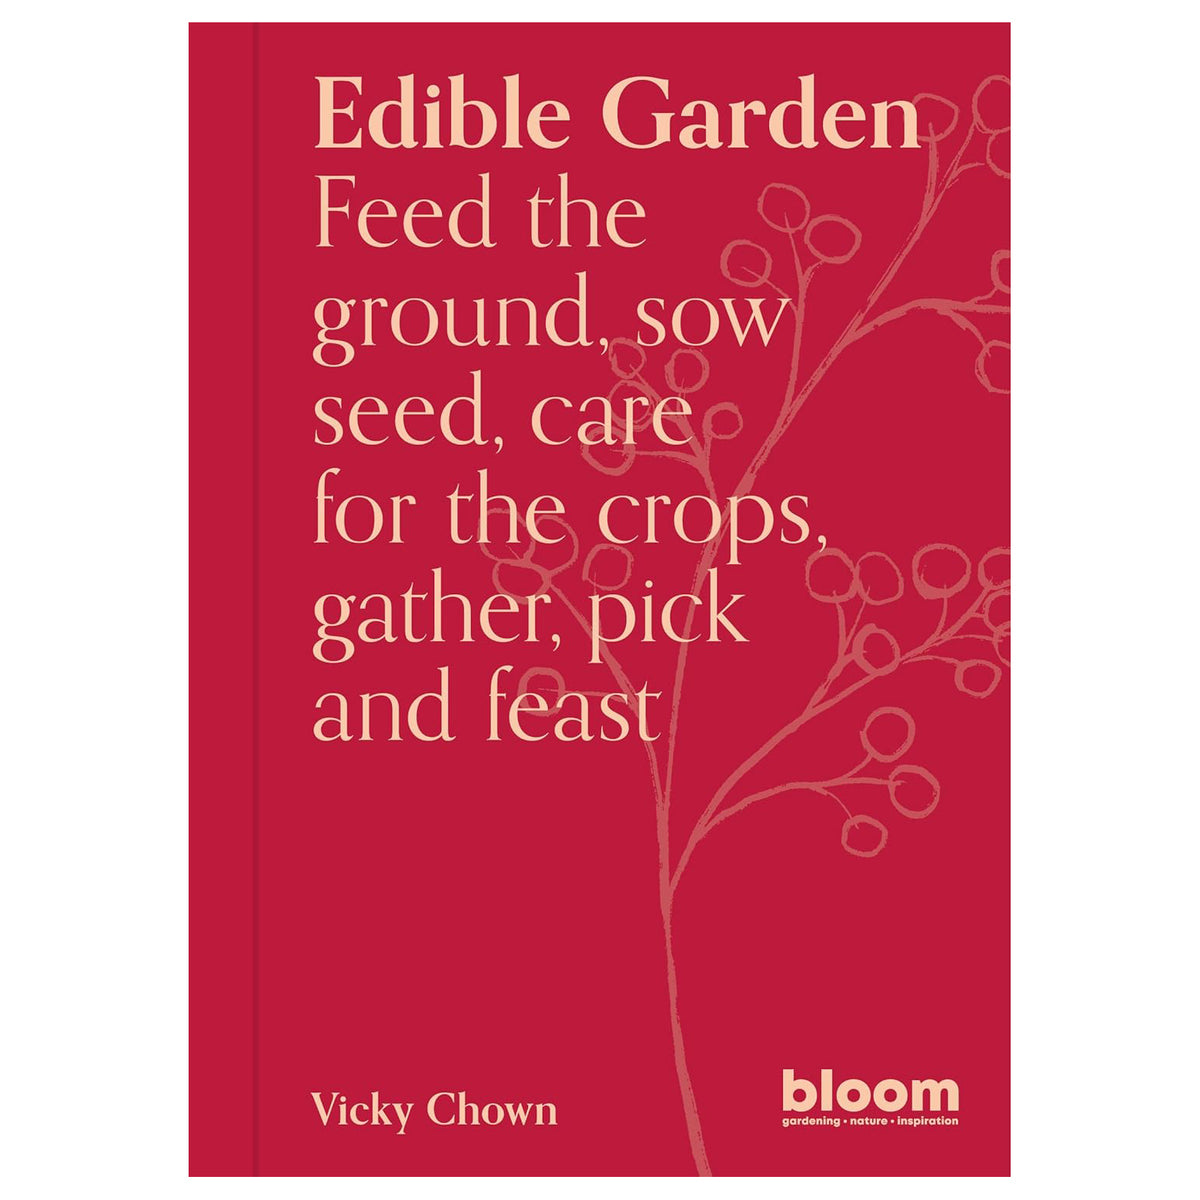 Edible Garden Feed the Ground, Soe Seed, Care for the Crops, Gather, Pick and Feast